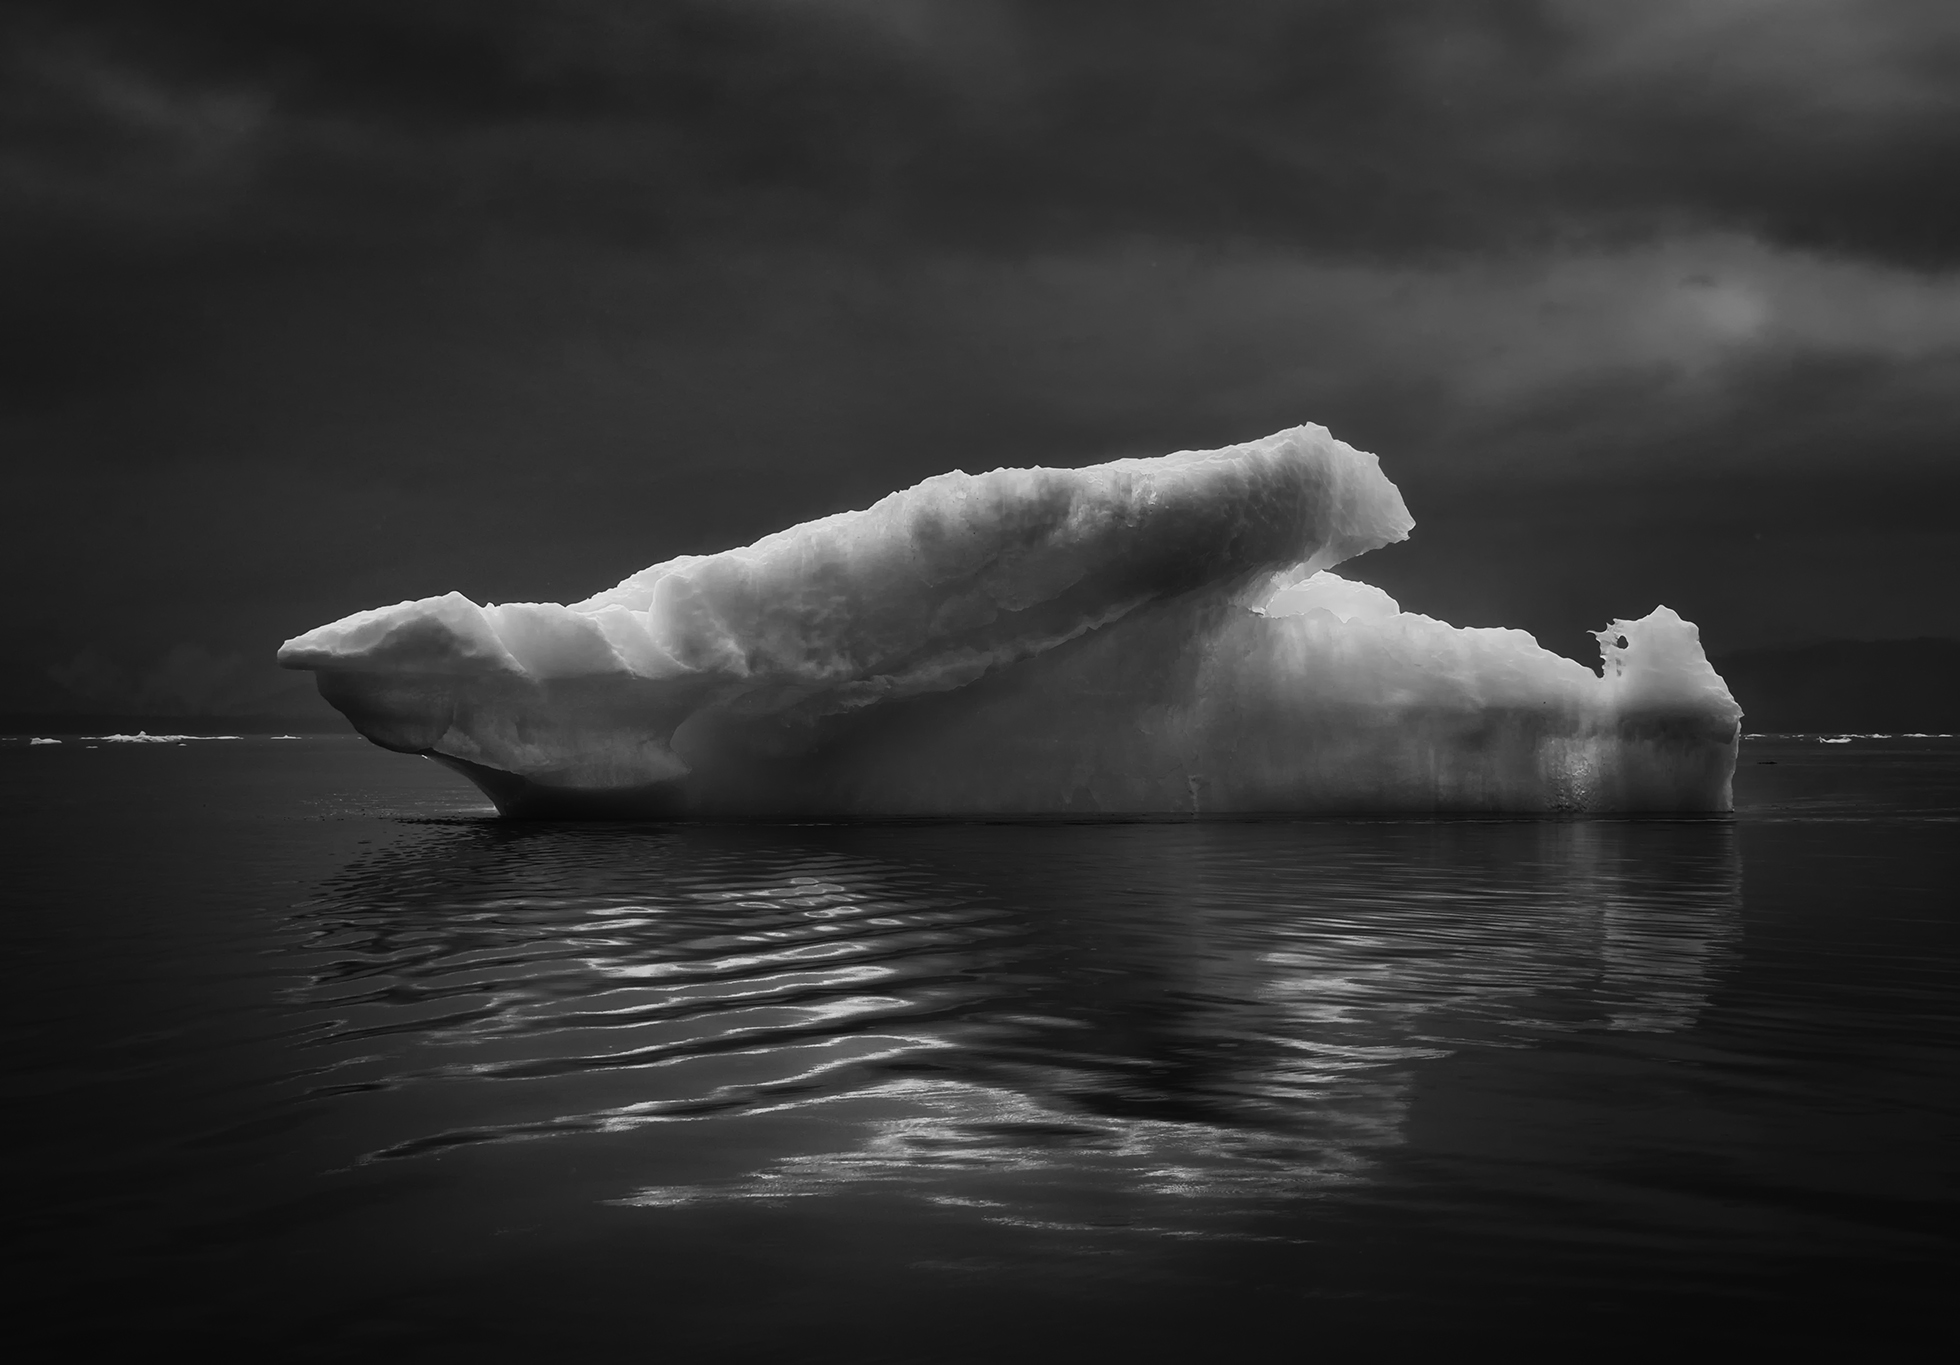 An elongated iceberg in a body of water against a cloudy sky. The iceberg’s shape is reminiscent of a whale breaching: head to the left and the left fin angled up and to the right.